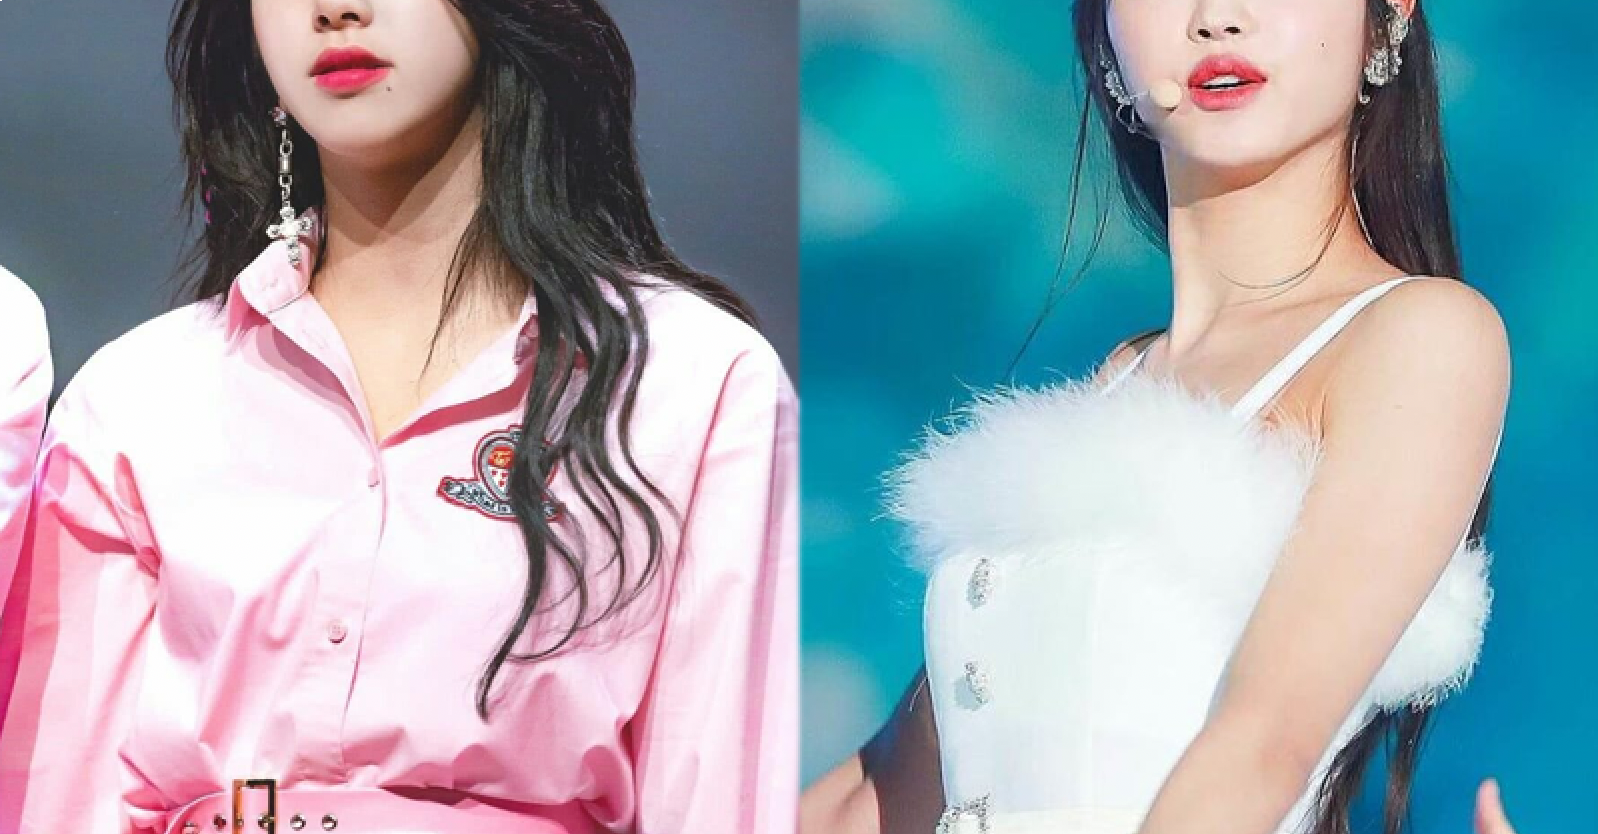 Korean Media Outlet Selects K-Pop Idols Who are Petite with Amazing Proportions